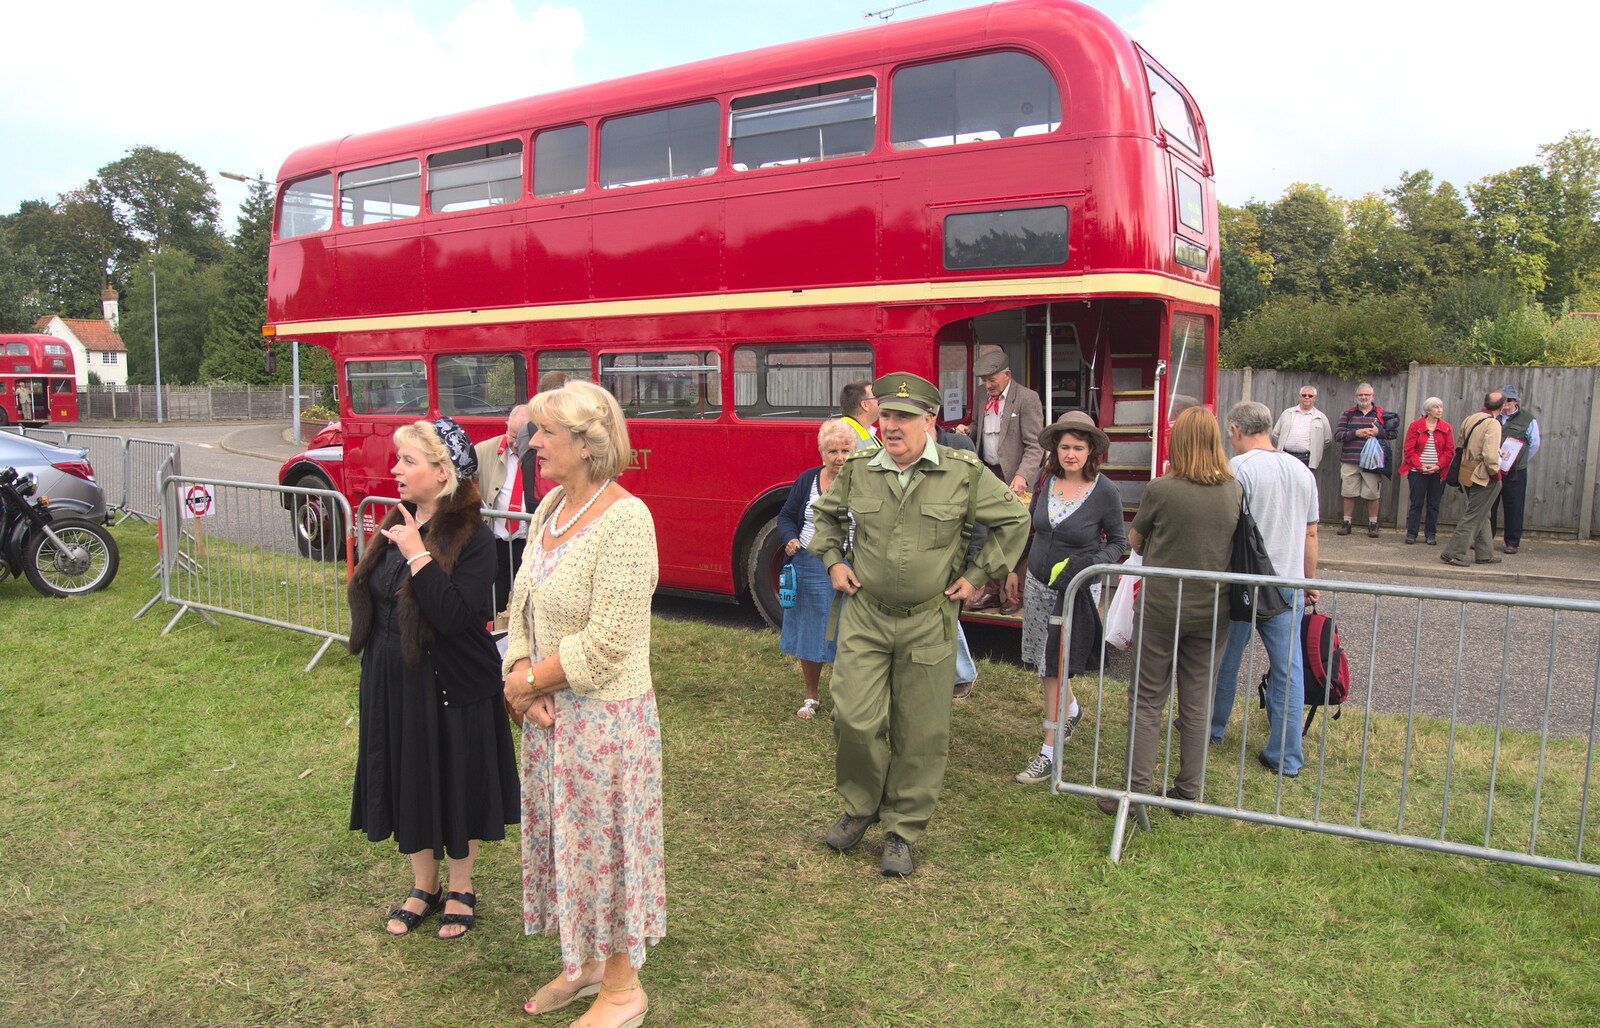 The byus drops us off at Holt from A Steamy 1940s Day Out, Holt and Sheringham, Norfolk - 20th September 2015